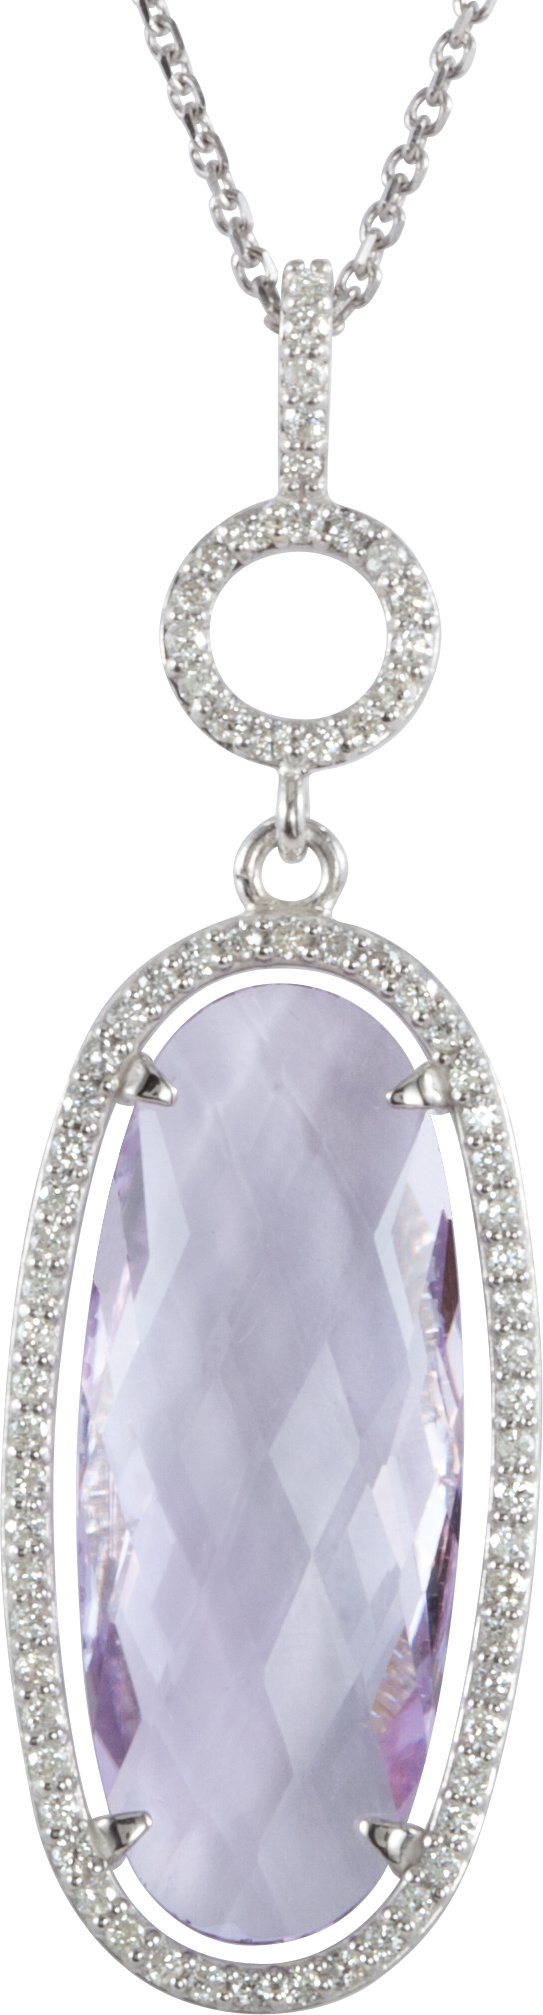 Halo-Styled Oval-Shaped Dangle Pendant or Necklace